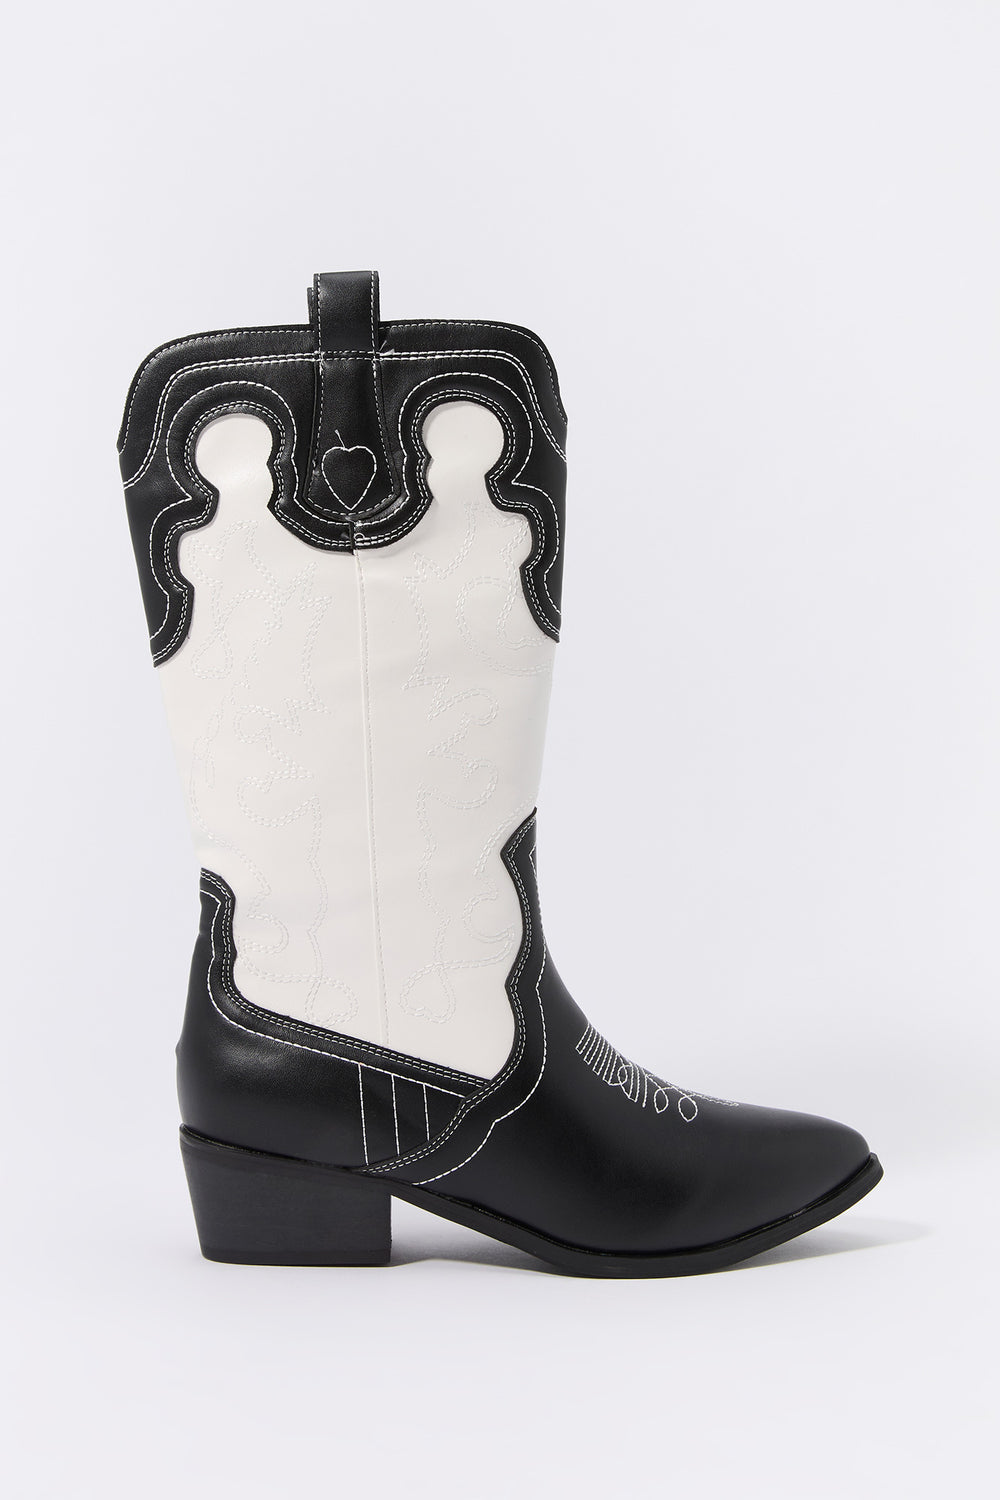 Black and White Cowboy Boot Black and White Cowboy Boot 1